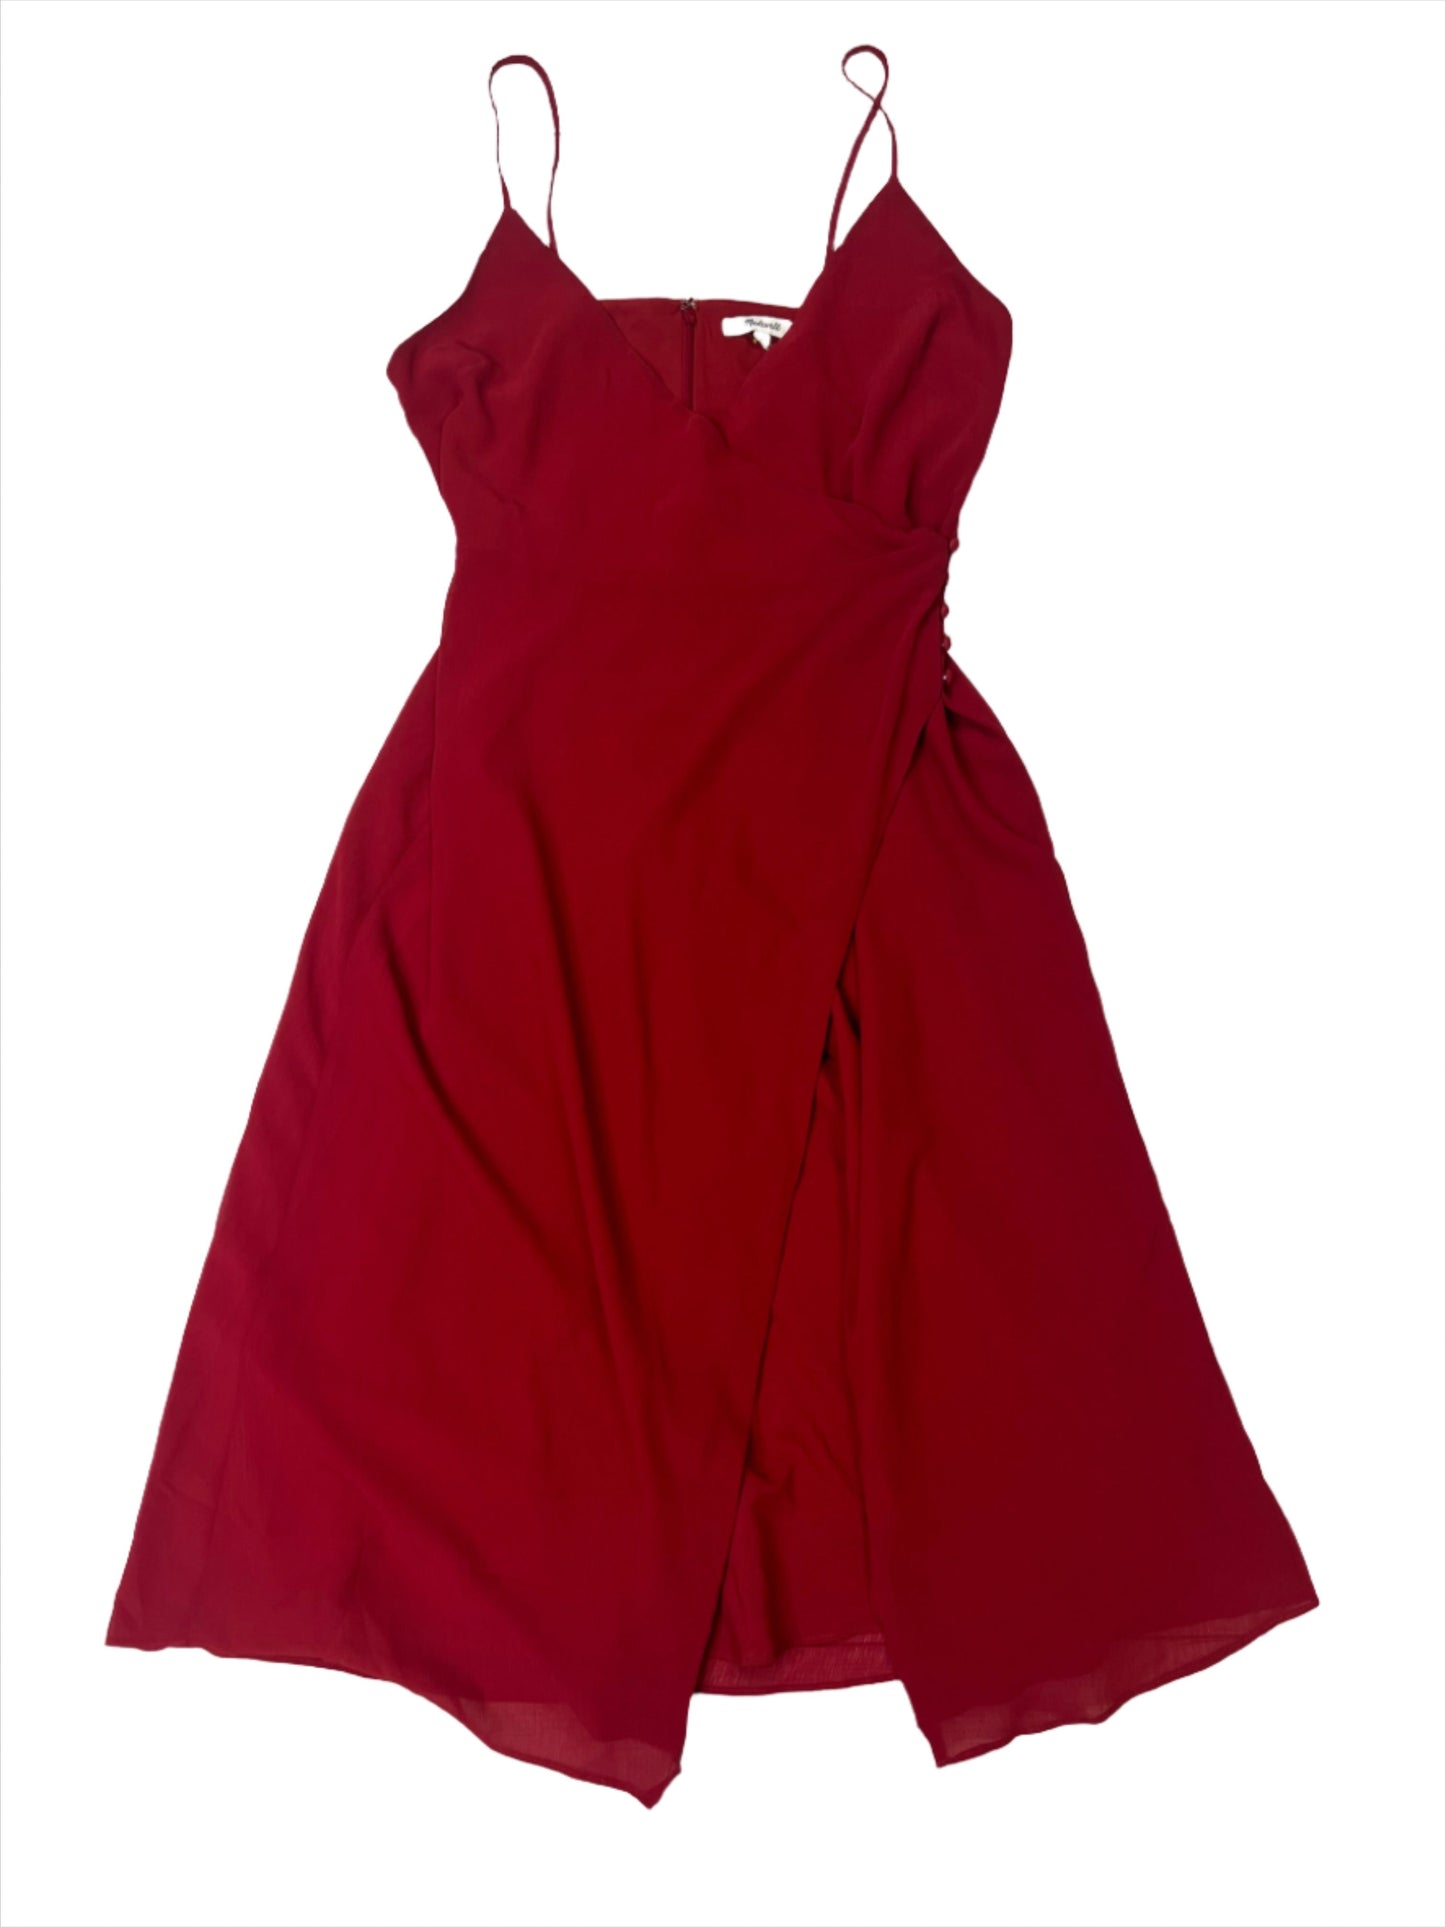 New! Red Dress Casual Midi Madewell, Size S